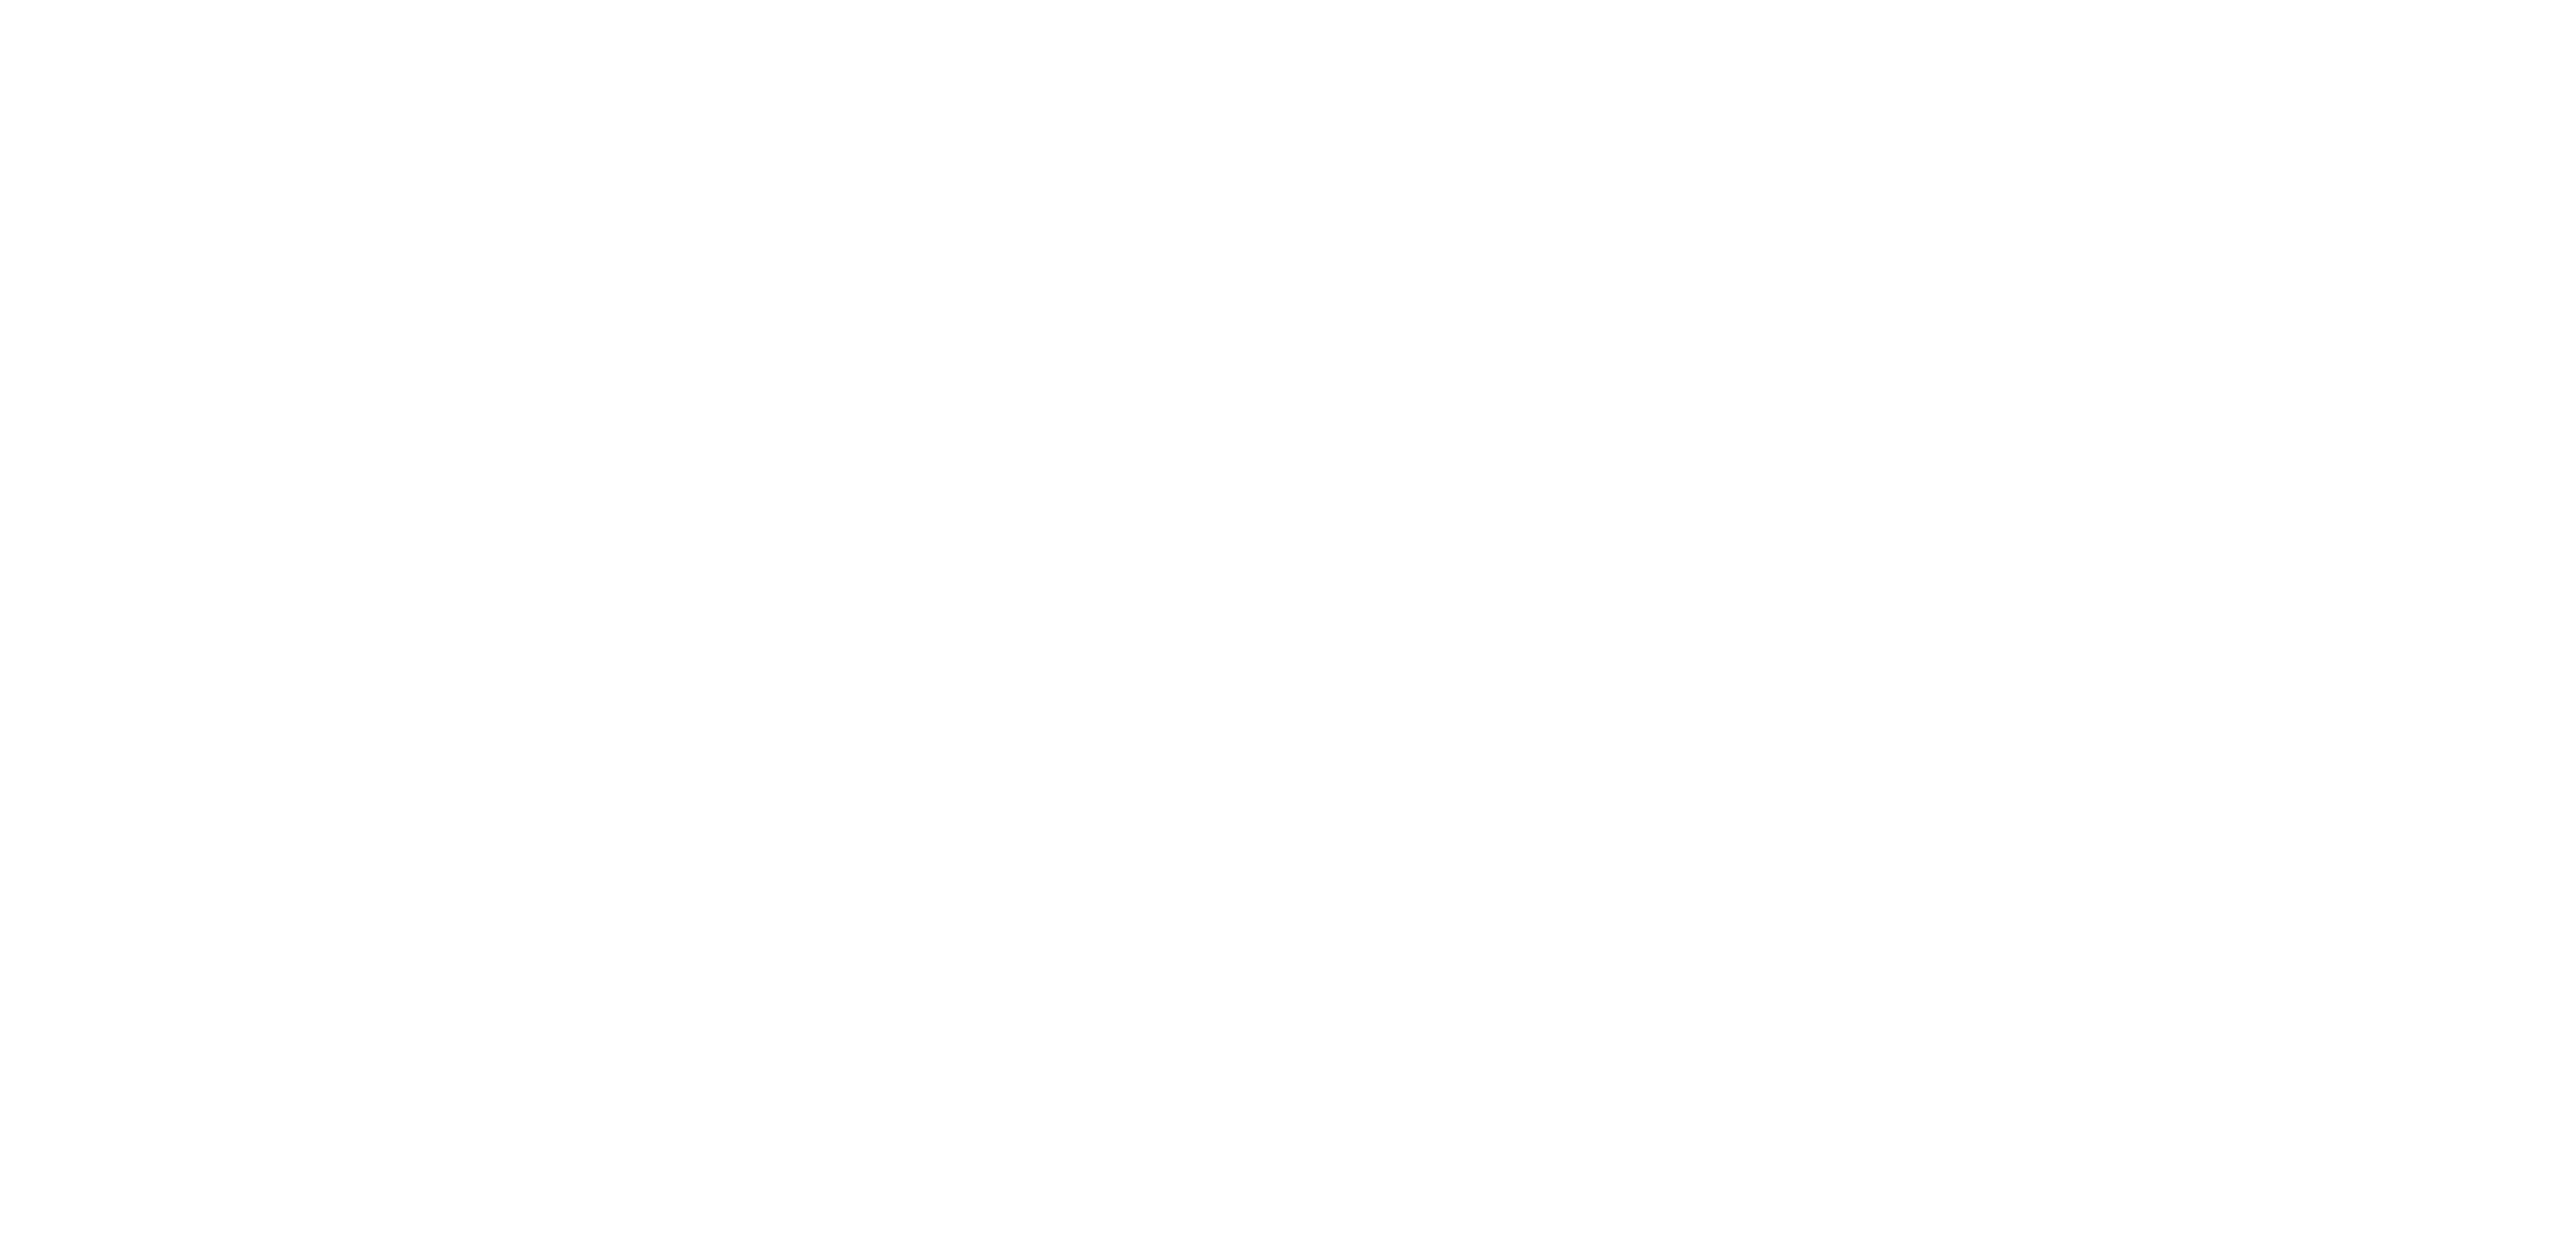 You are someone worth knowing.